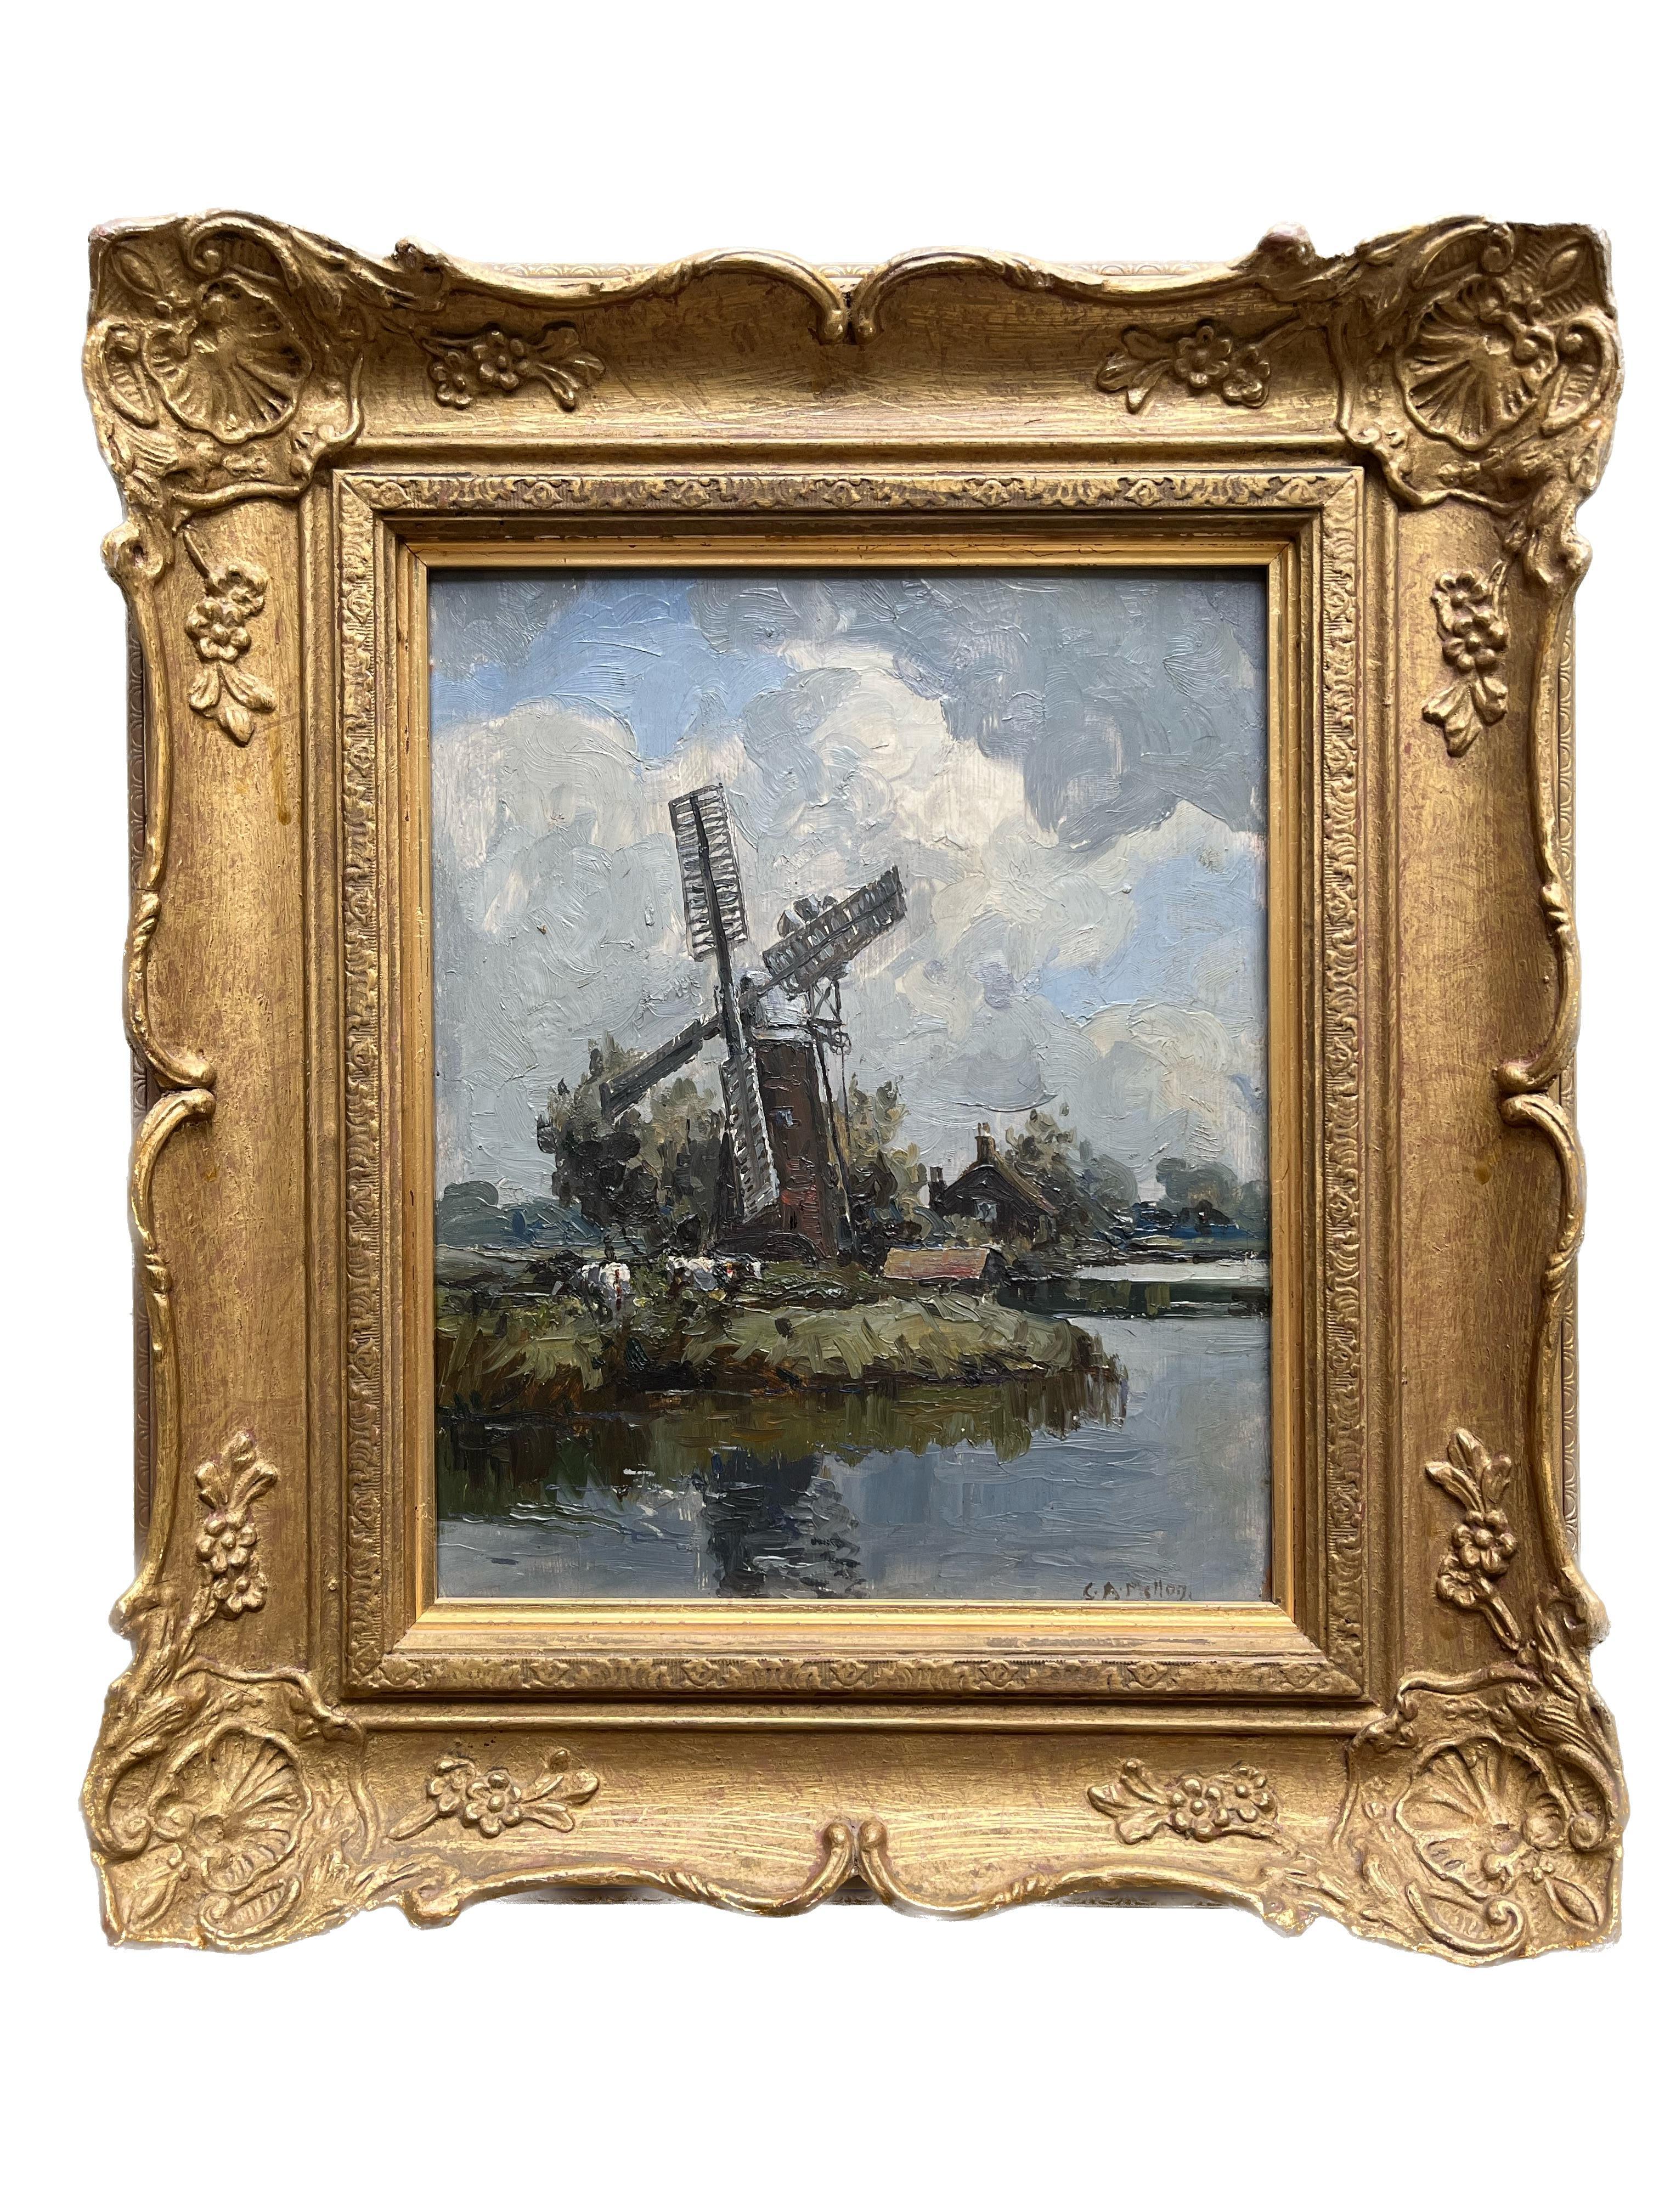 British impressionist en plein air scene of Windmill on the Norfolk Broads - Painting by CAMPBELL MELLON